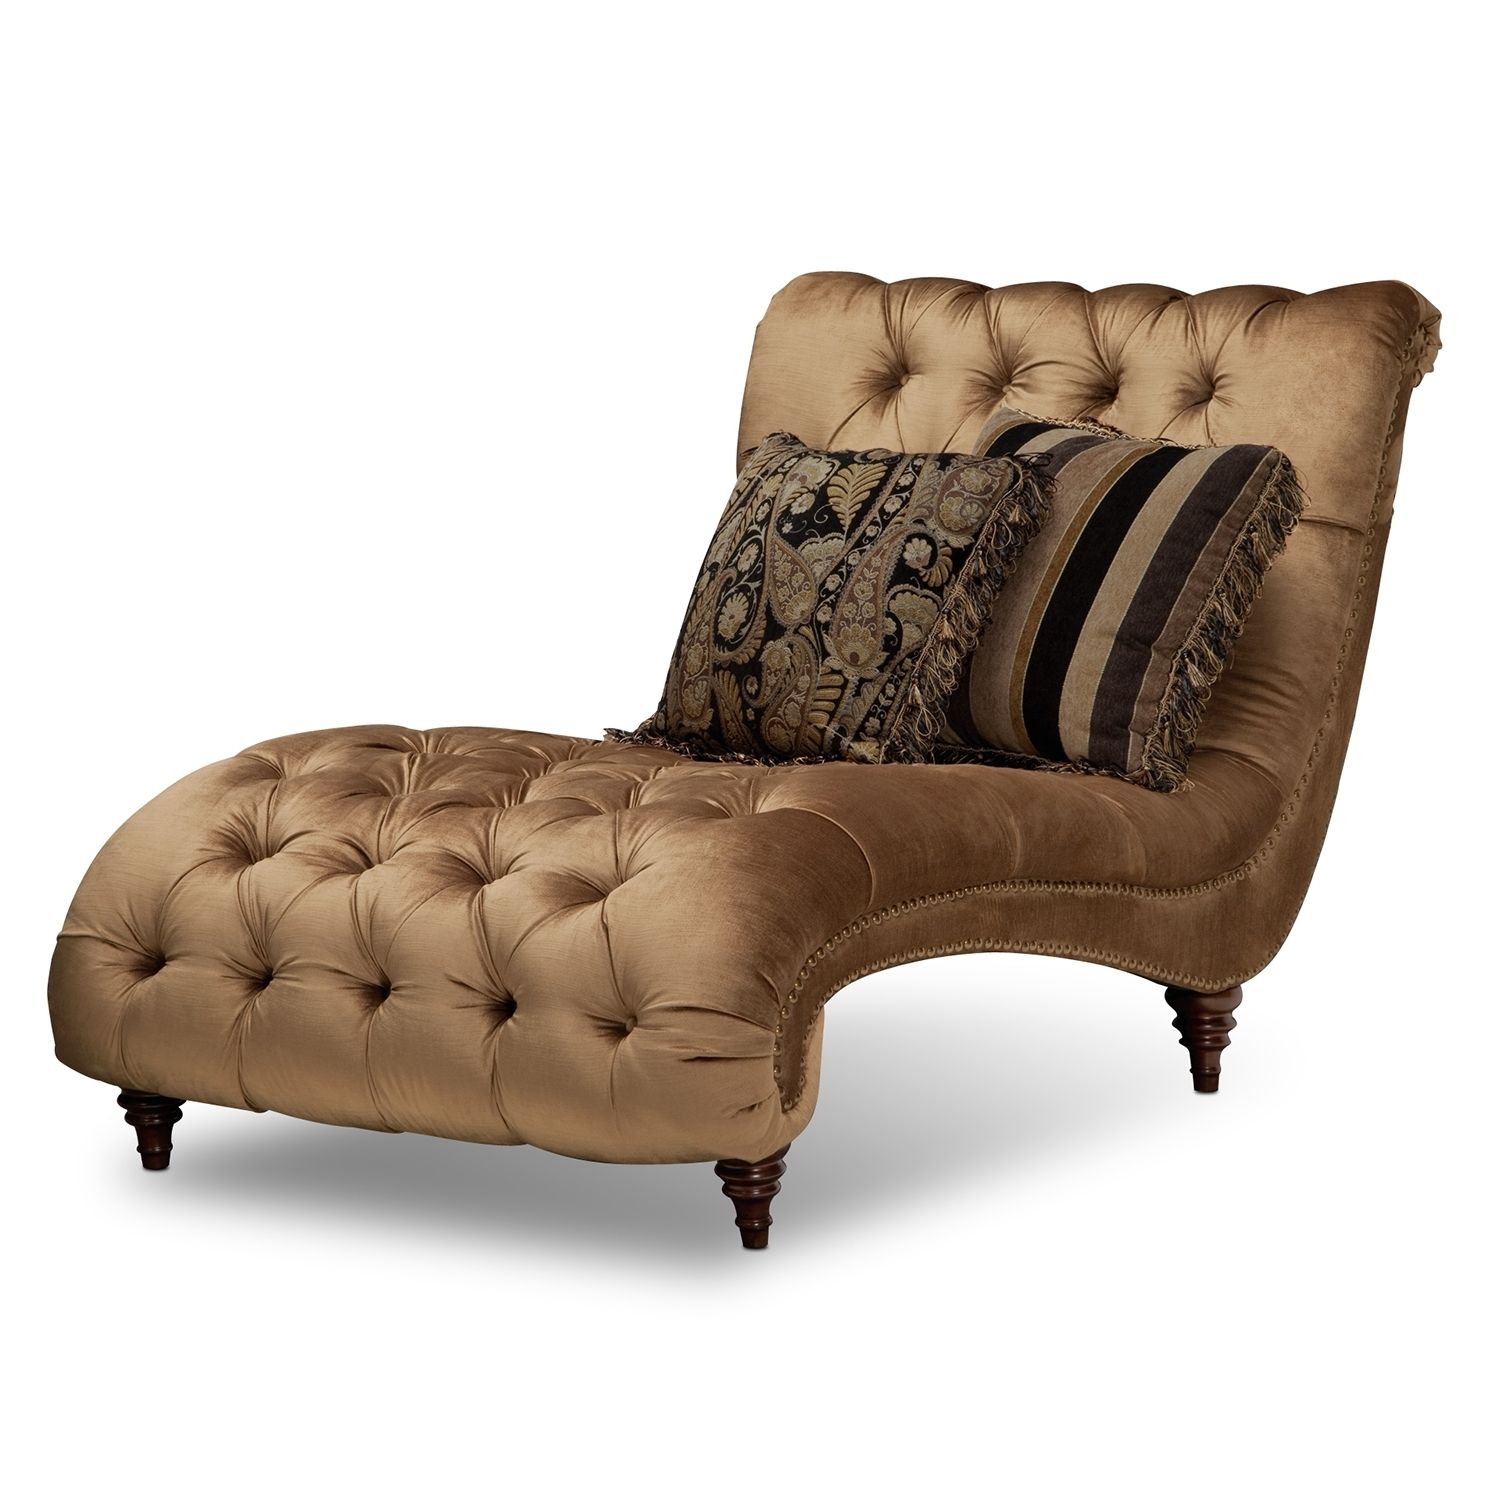 Gold Tufted Chaise Lounge Chair With Accent Pillows In Bedroom Intended For Most Recently Released Tufted Chaise Lounge Chairs (View 11 of 15)